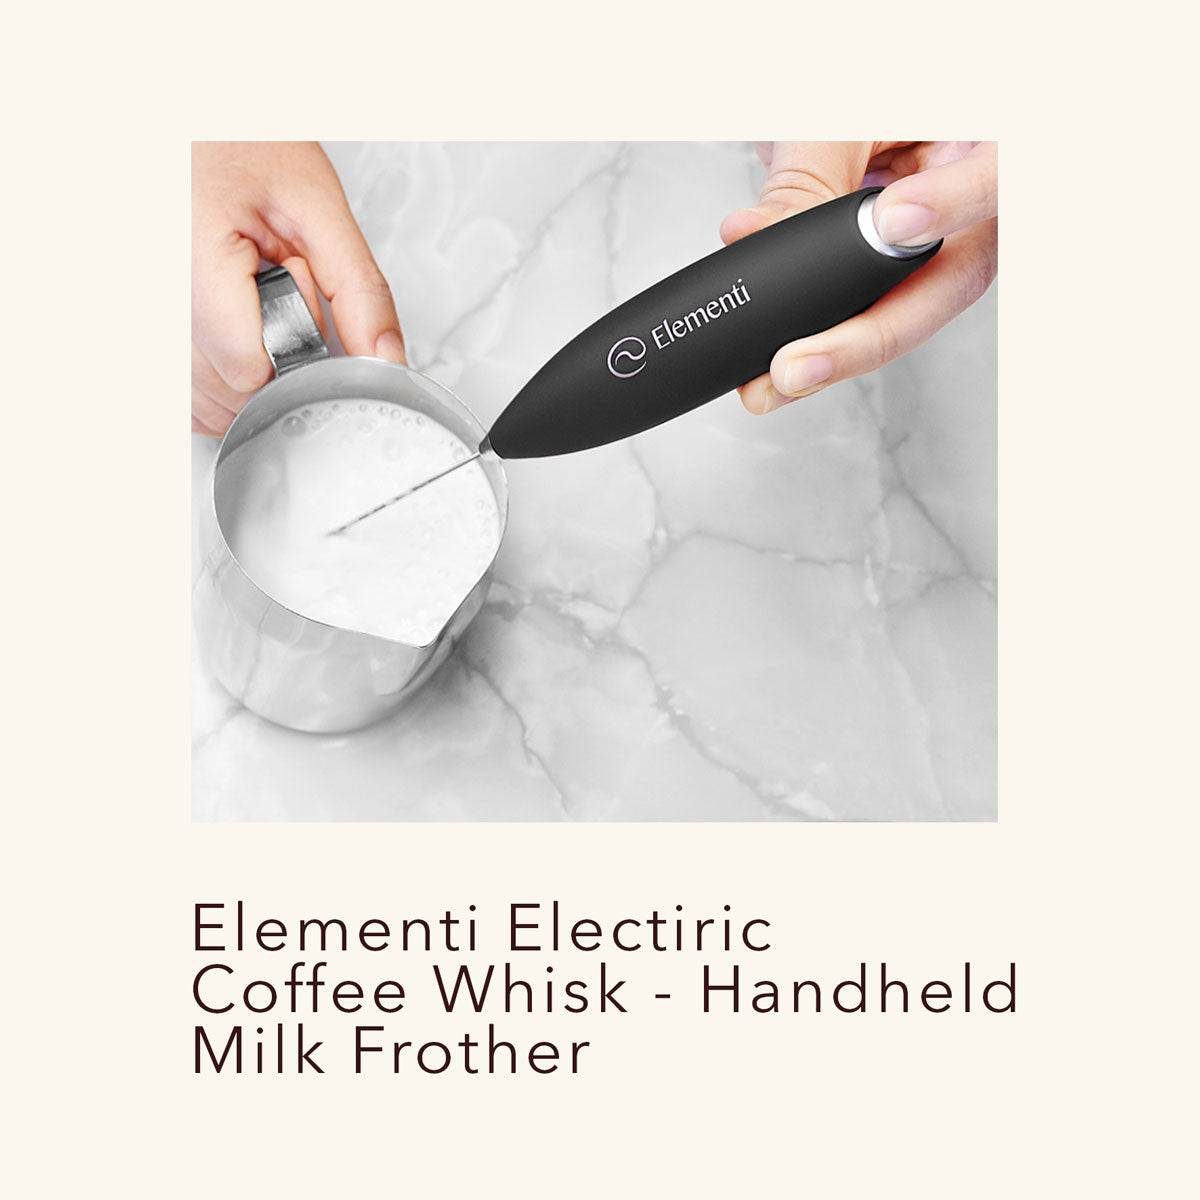 Buy Elementi Electric Coffee Whisk - Handheld Milk Frother